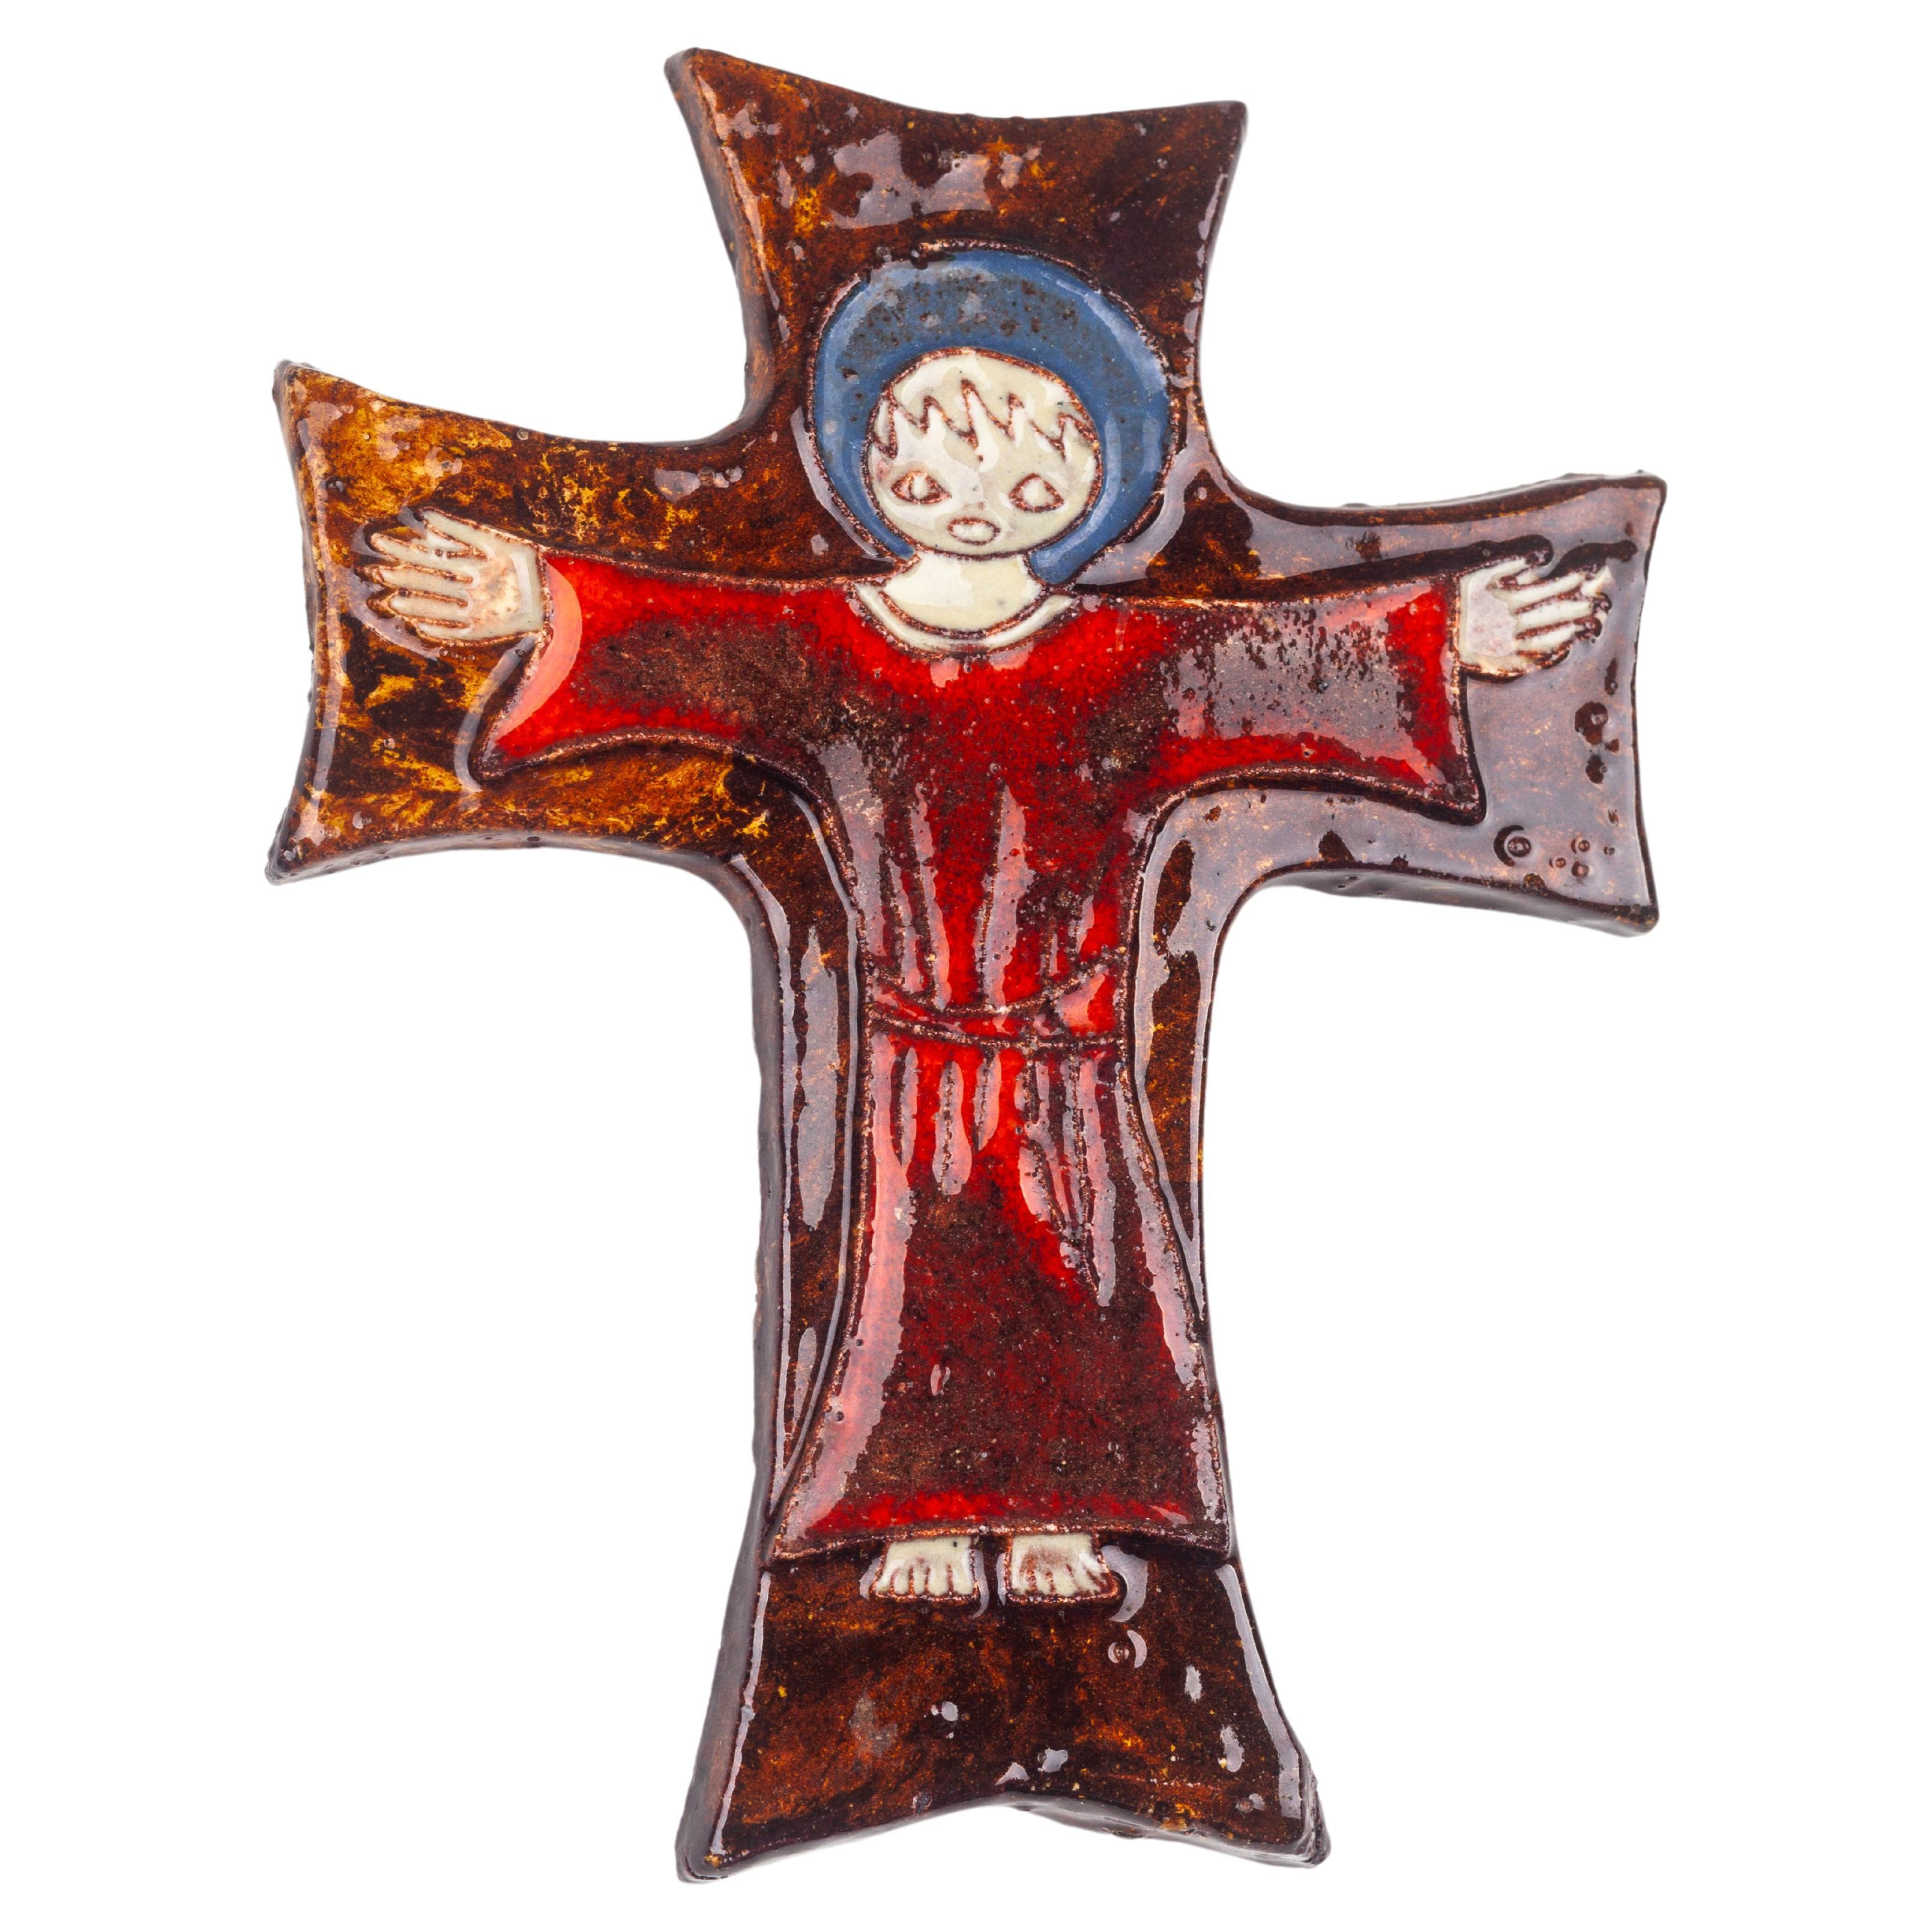 This ceramic cross, handcrafted by studio pottery artists in mid-century Europe, presents a stylized figurative scene within its bounds, evoking the rich tradition of religious art reimagined through the lens of modern design. The figure, likely